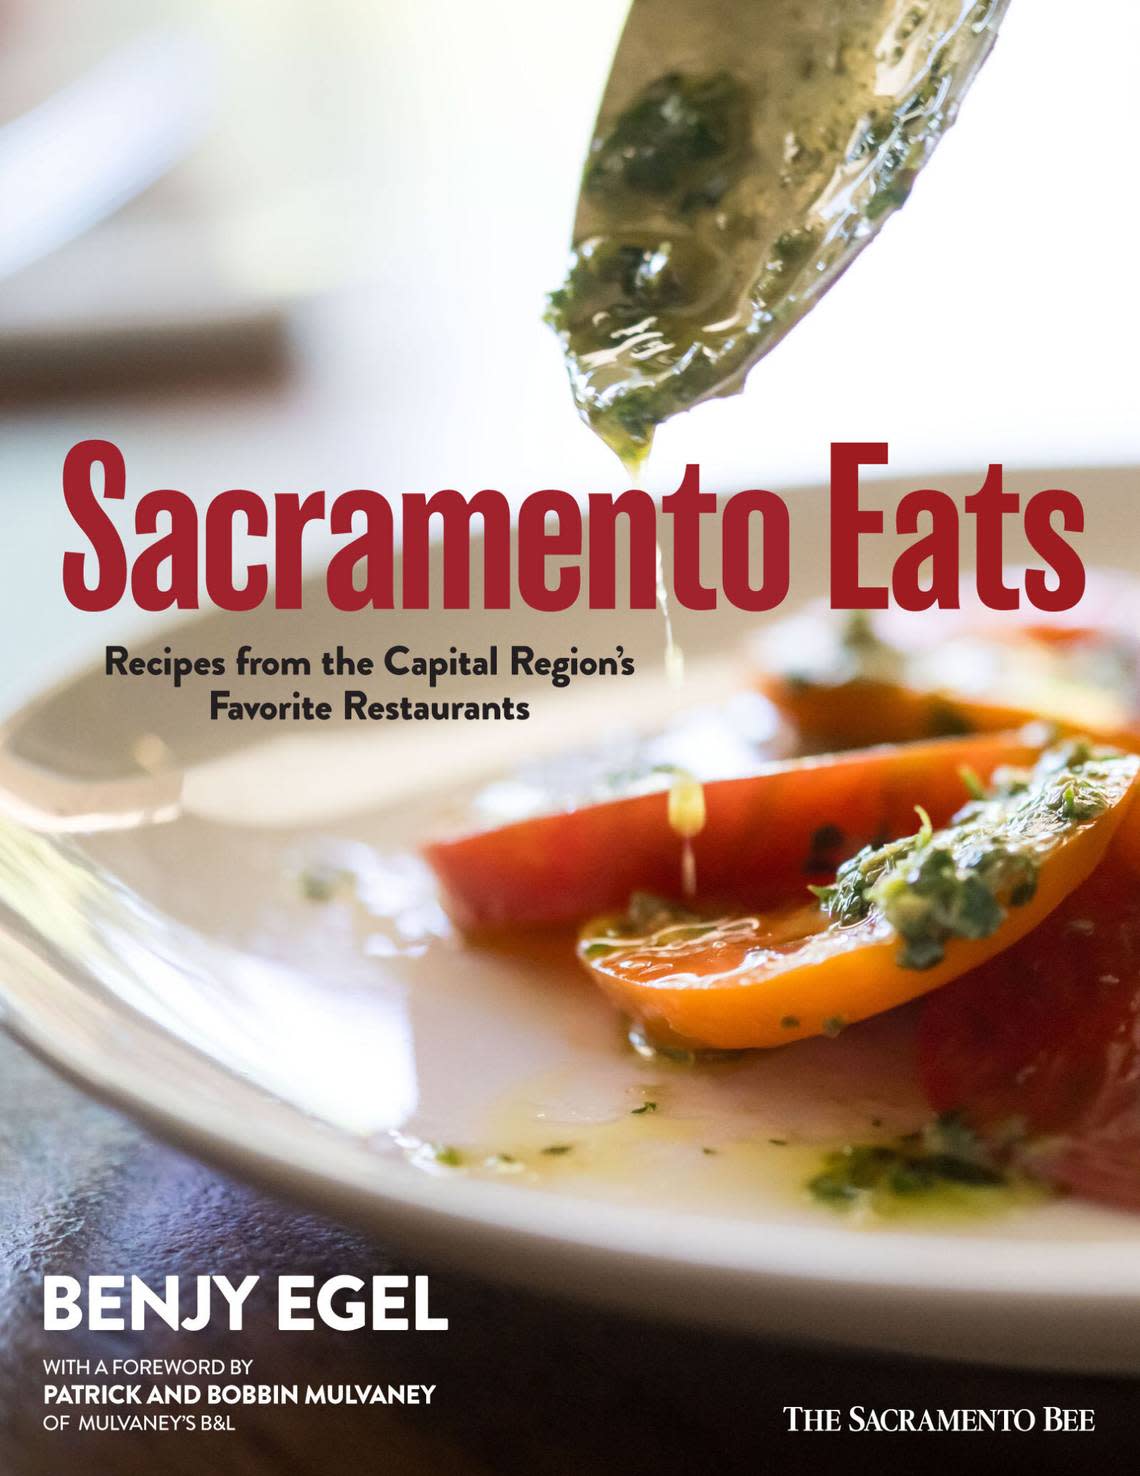 “Sacramento Eats: Recipes from the Capital Region’s Favorite Restaurants” is a collection of 60 restaurants from local institutions. 